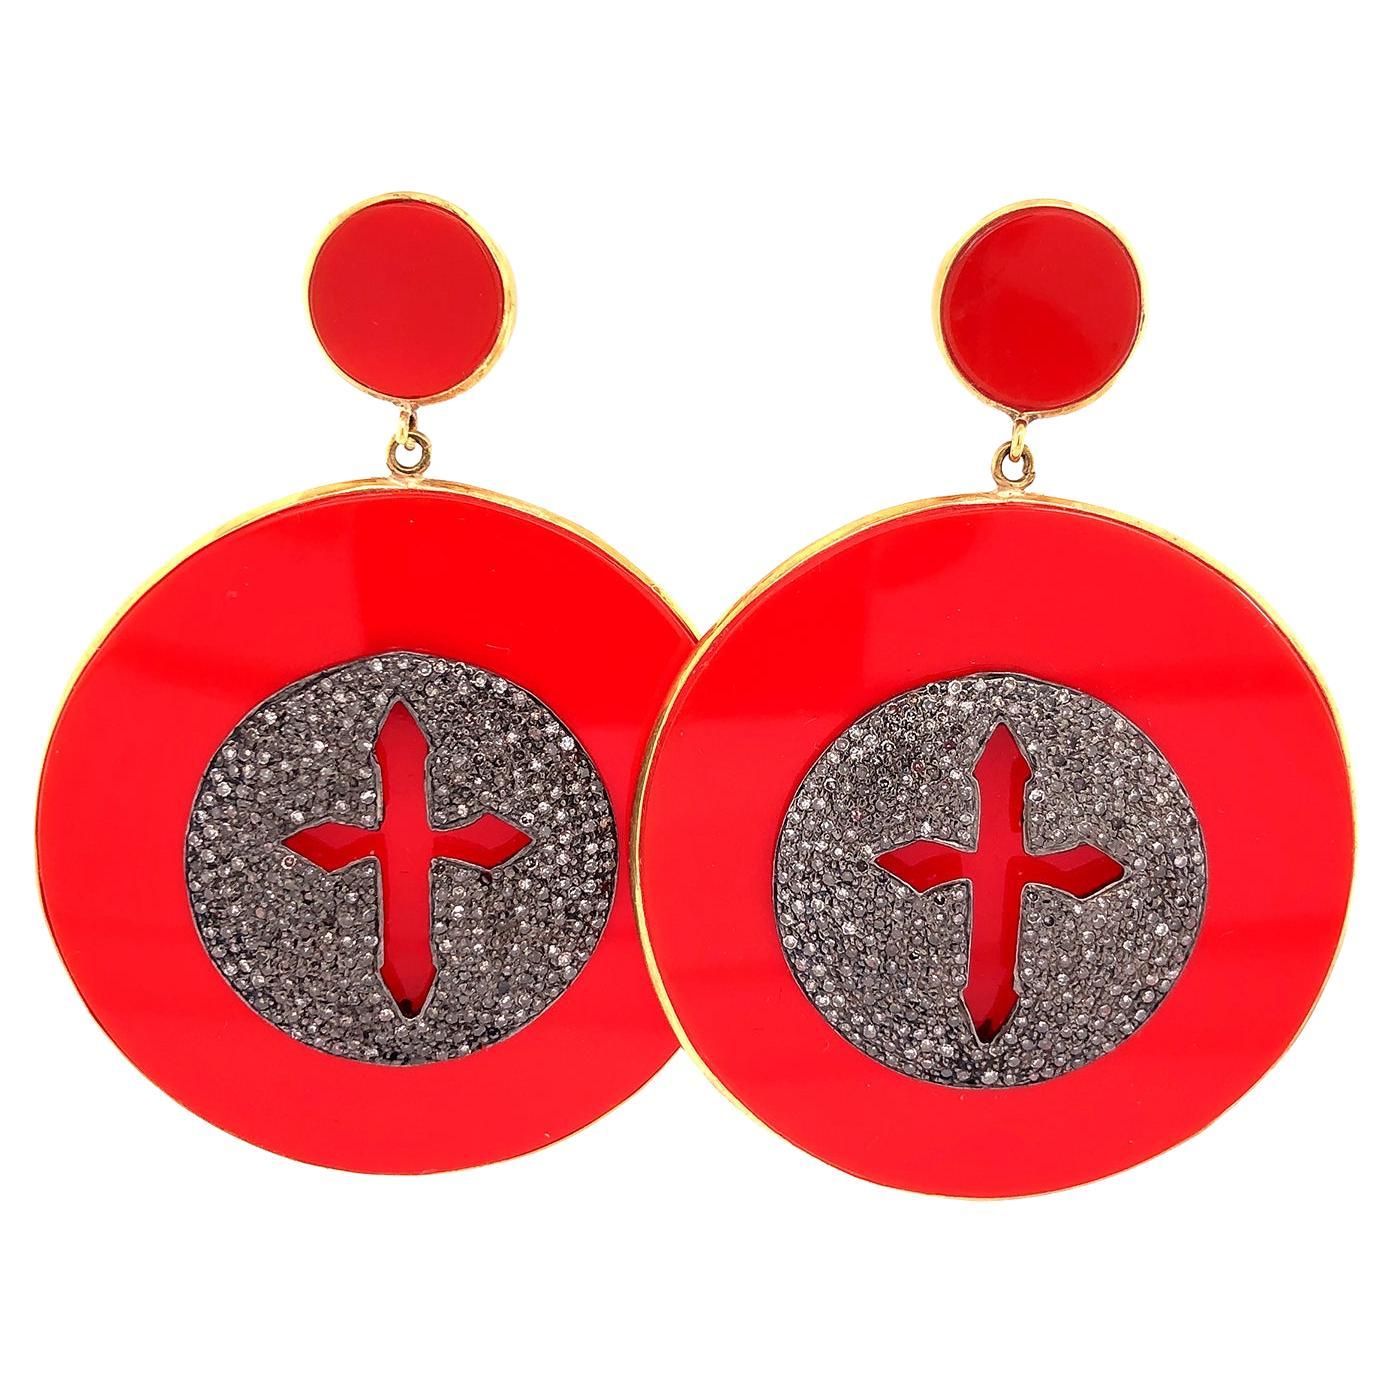 18k Gold & Silver Red Enameled Disc Earrings With Pave Diamonds on It